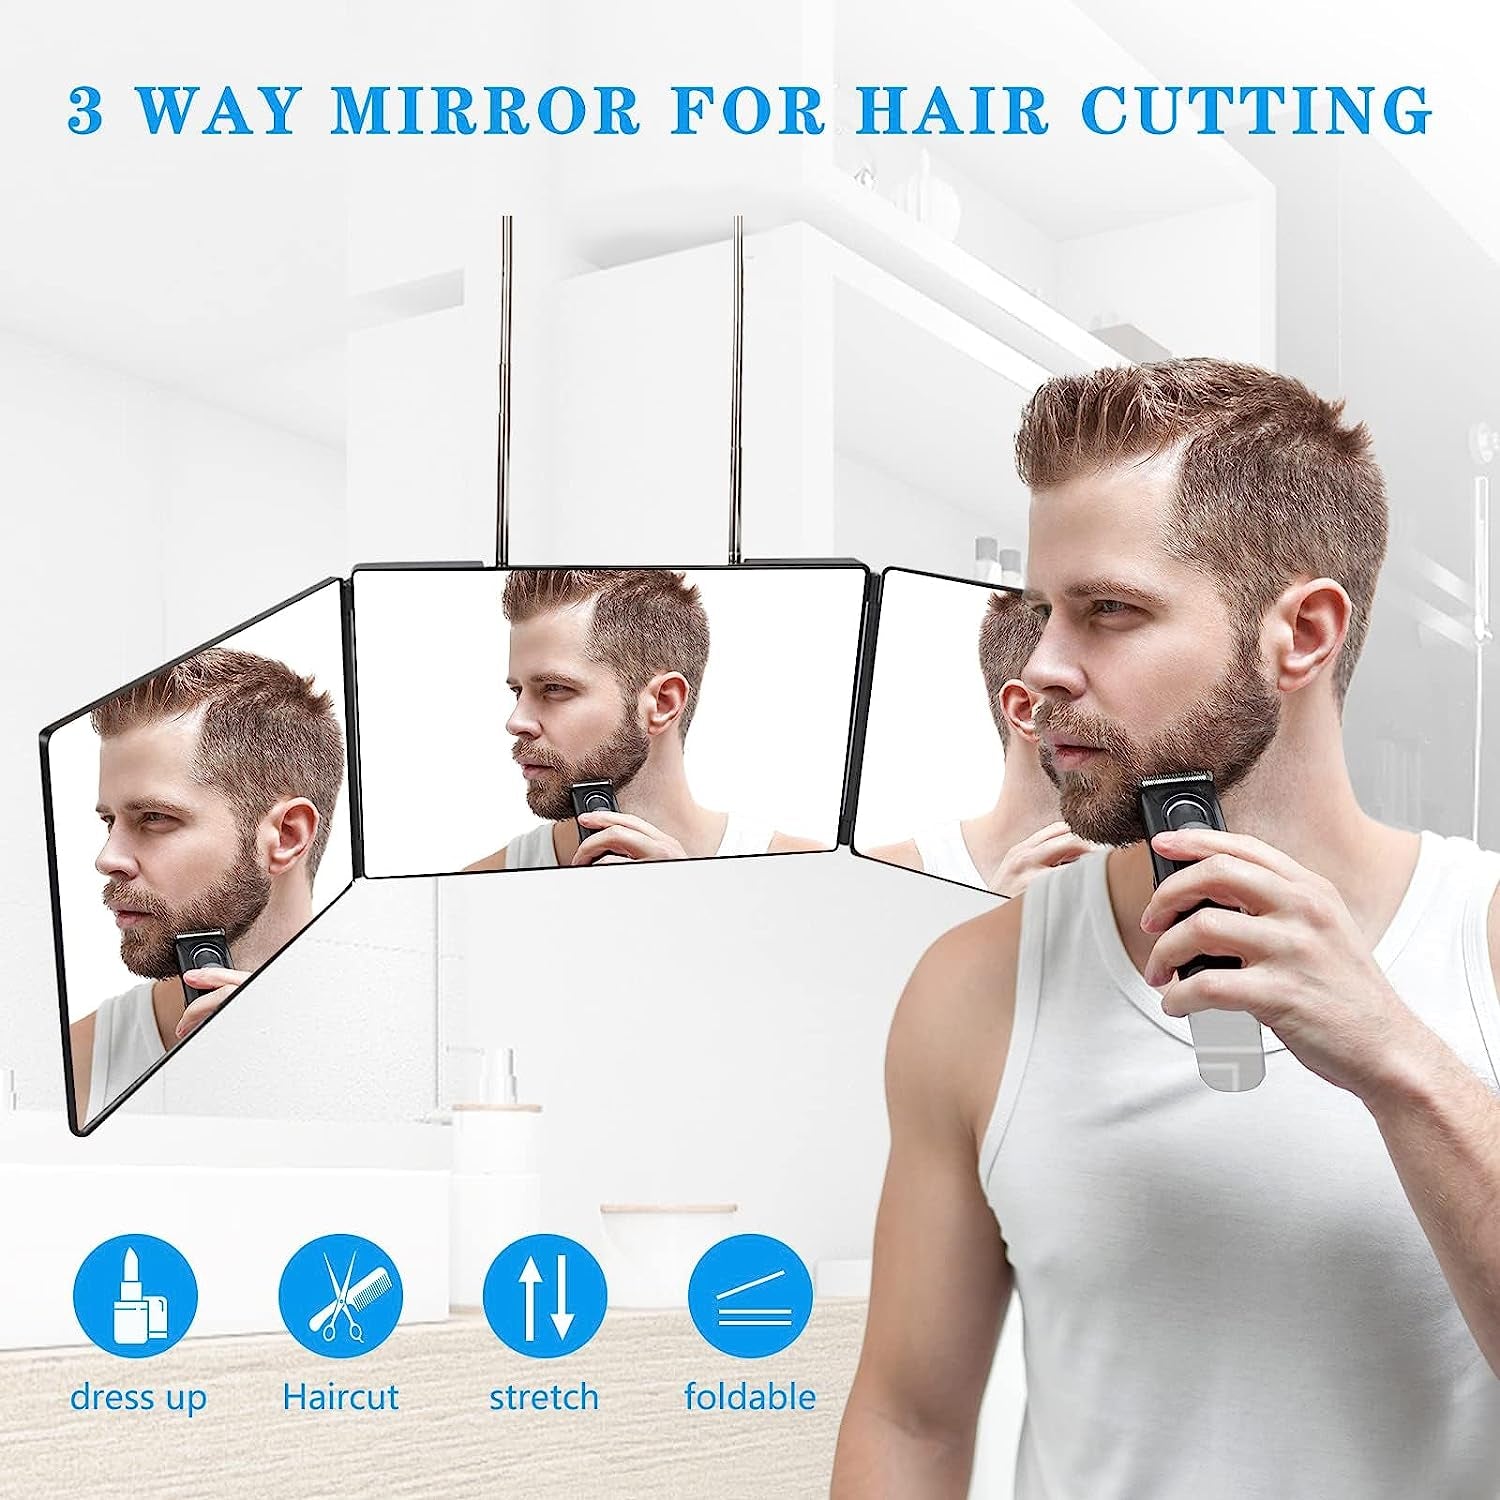 3 Way Mirror for Self Hair Cutting Tools with Height Adjustable Mirror 360 Trifold Mirror for Makeup to See Back of Head (Black)